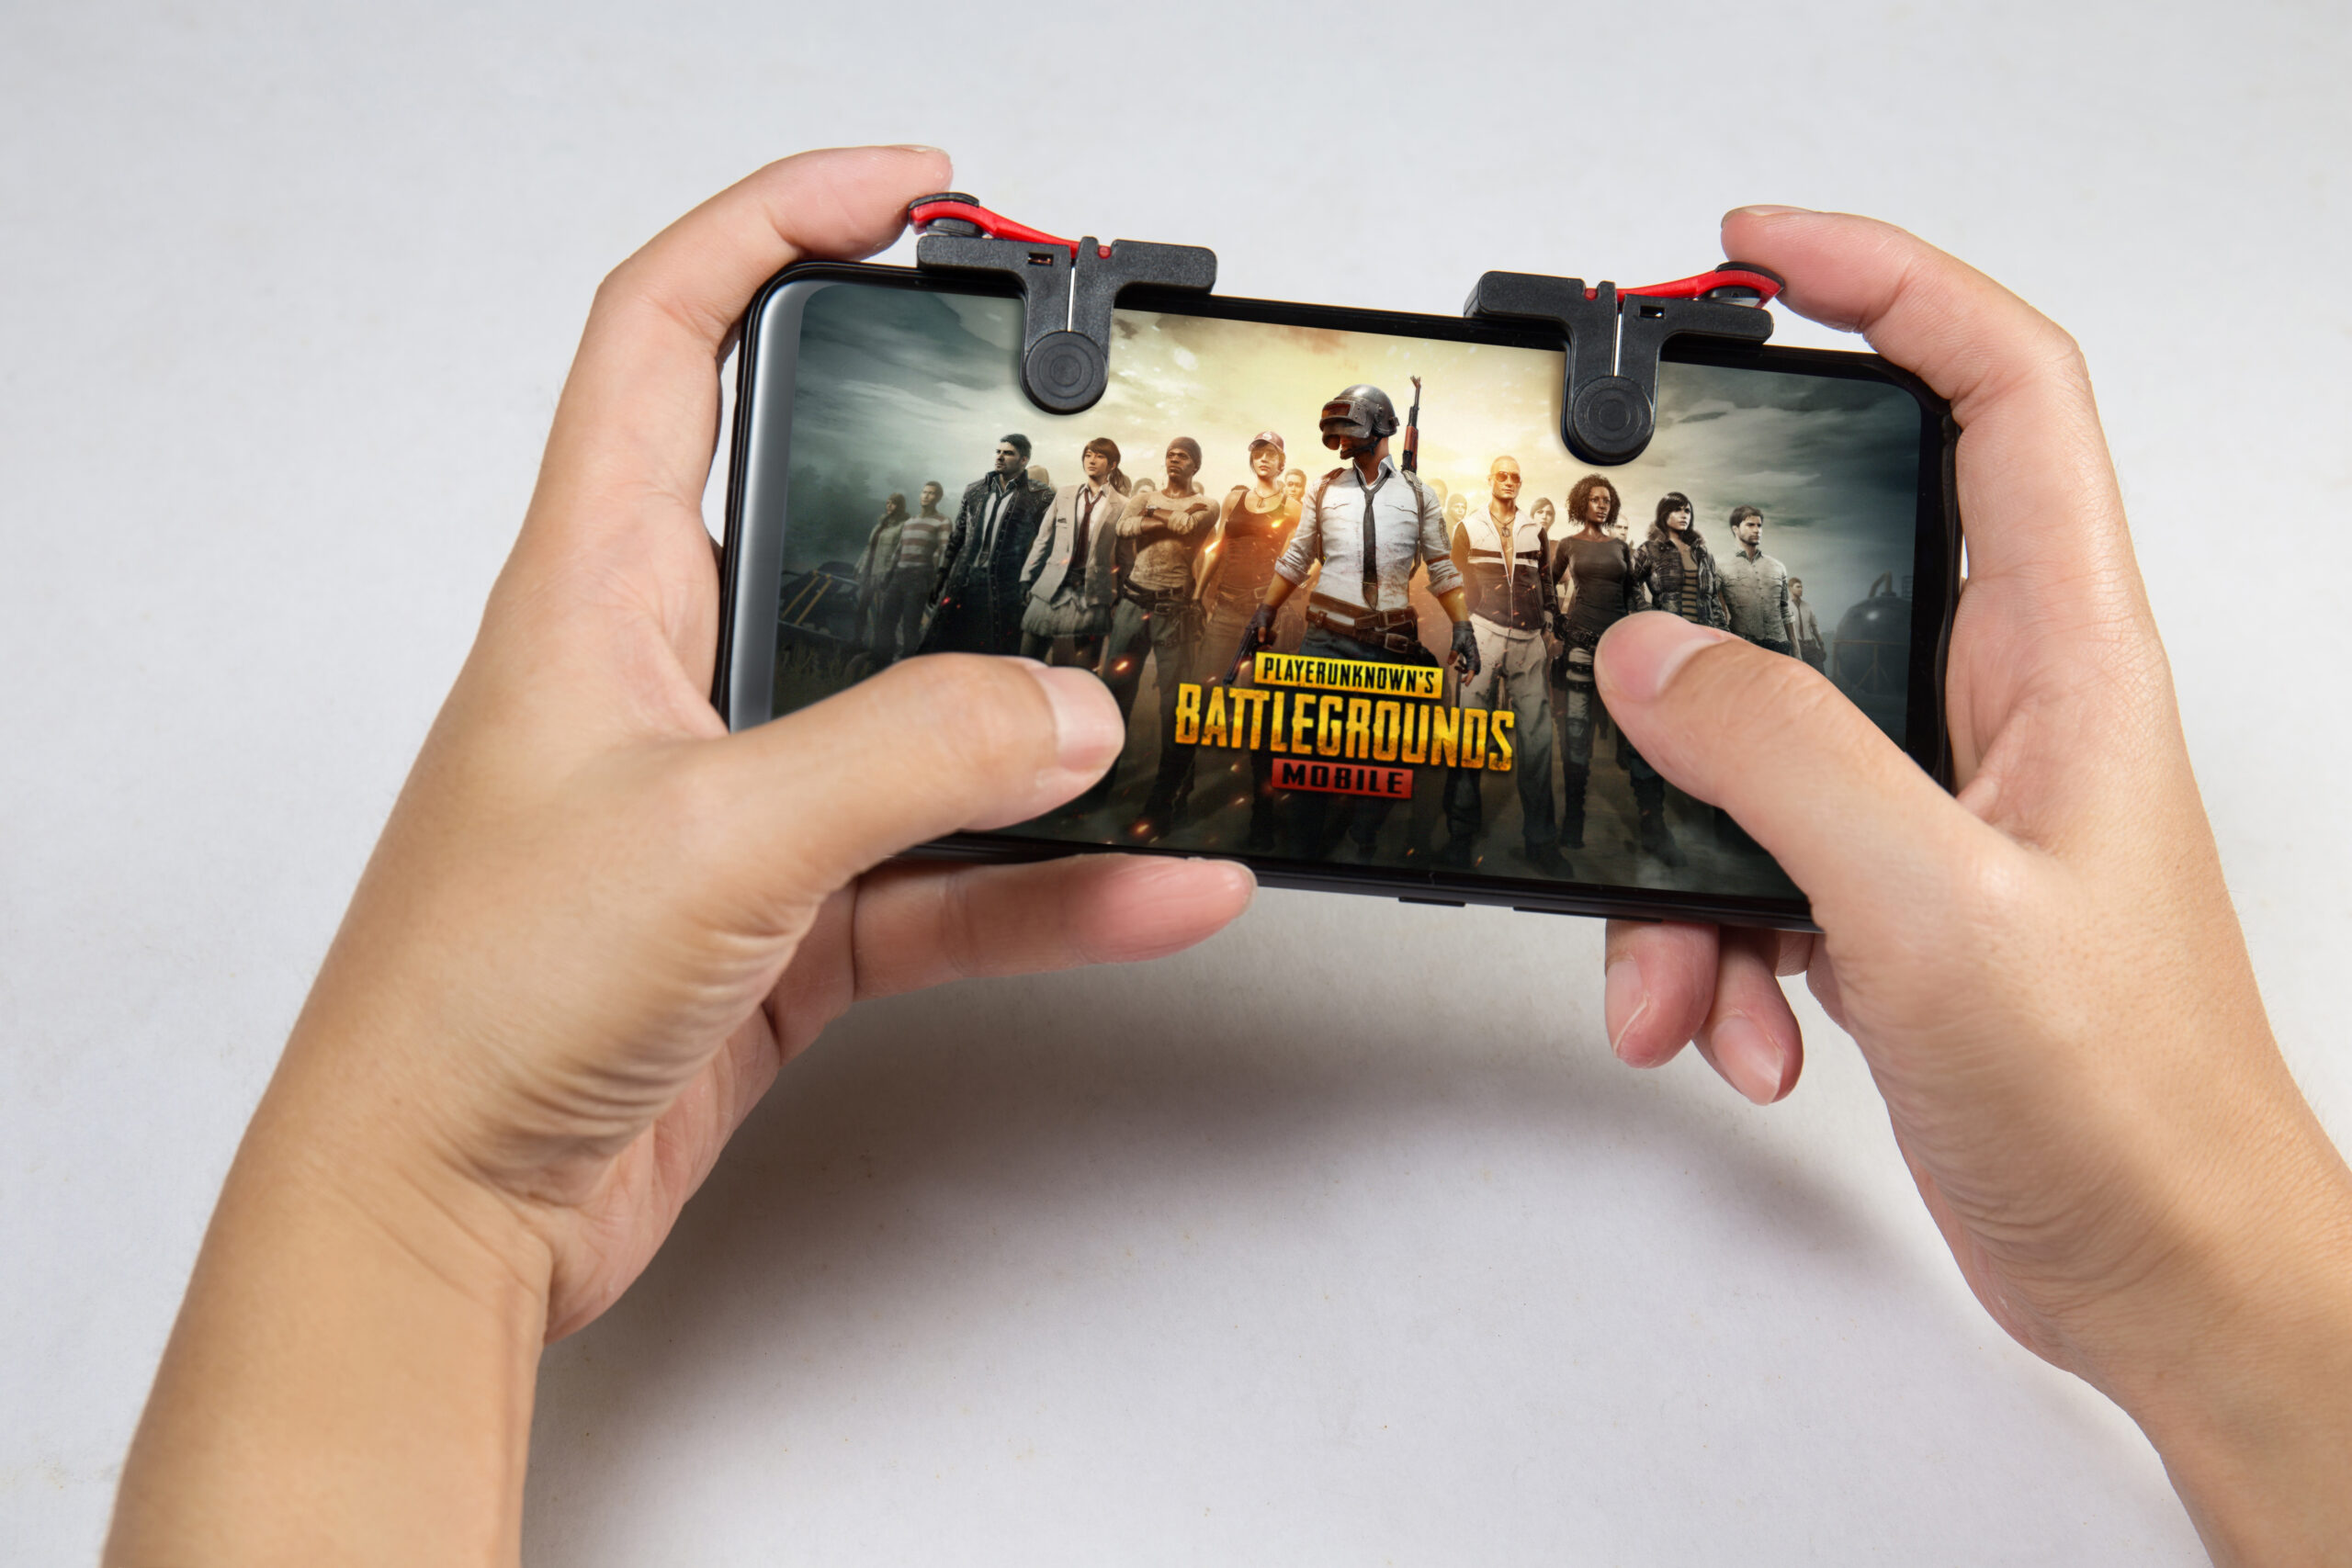 Hand holding a smartphone with Player's Unknown Battleground also known as PUBG online shooting gaming